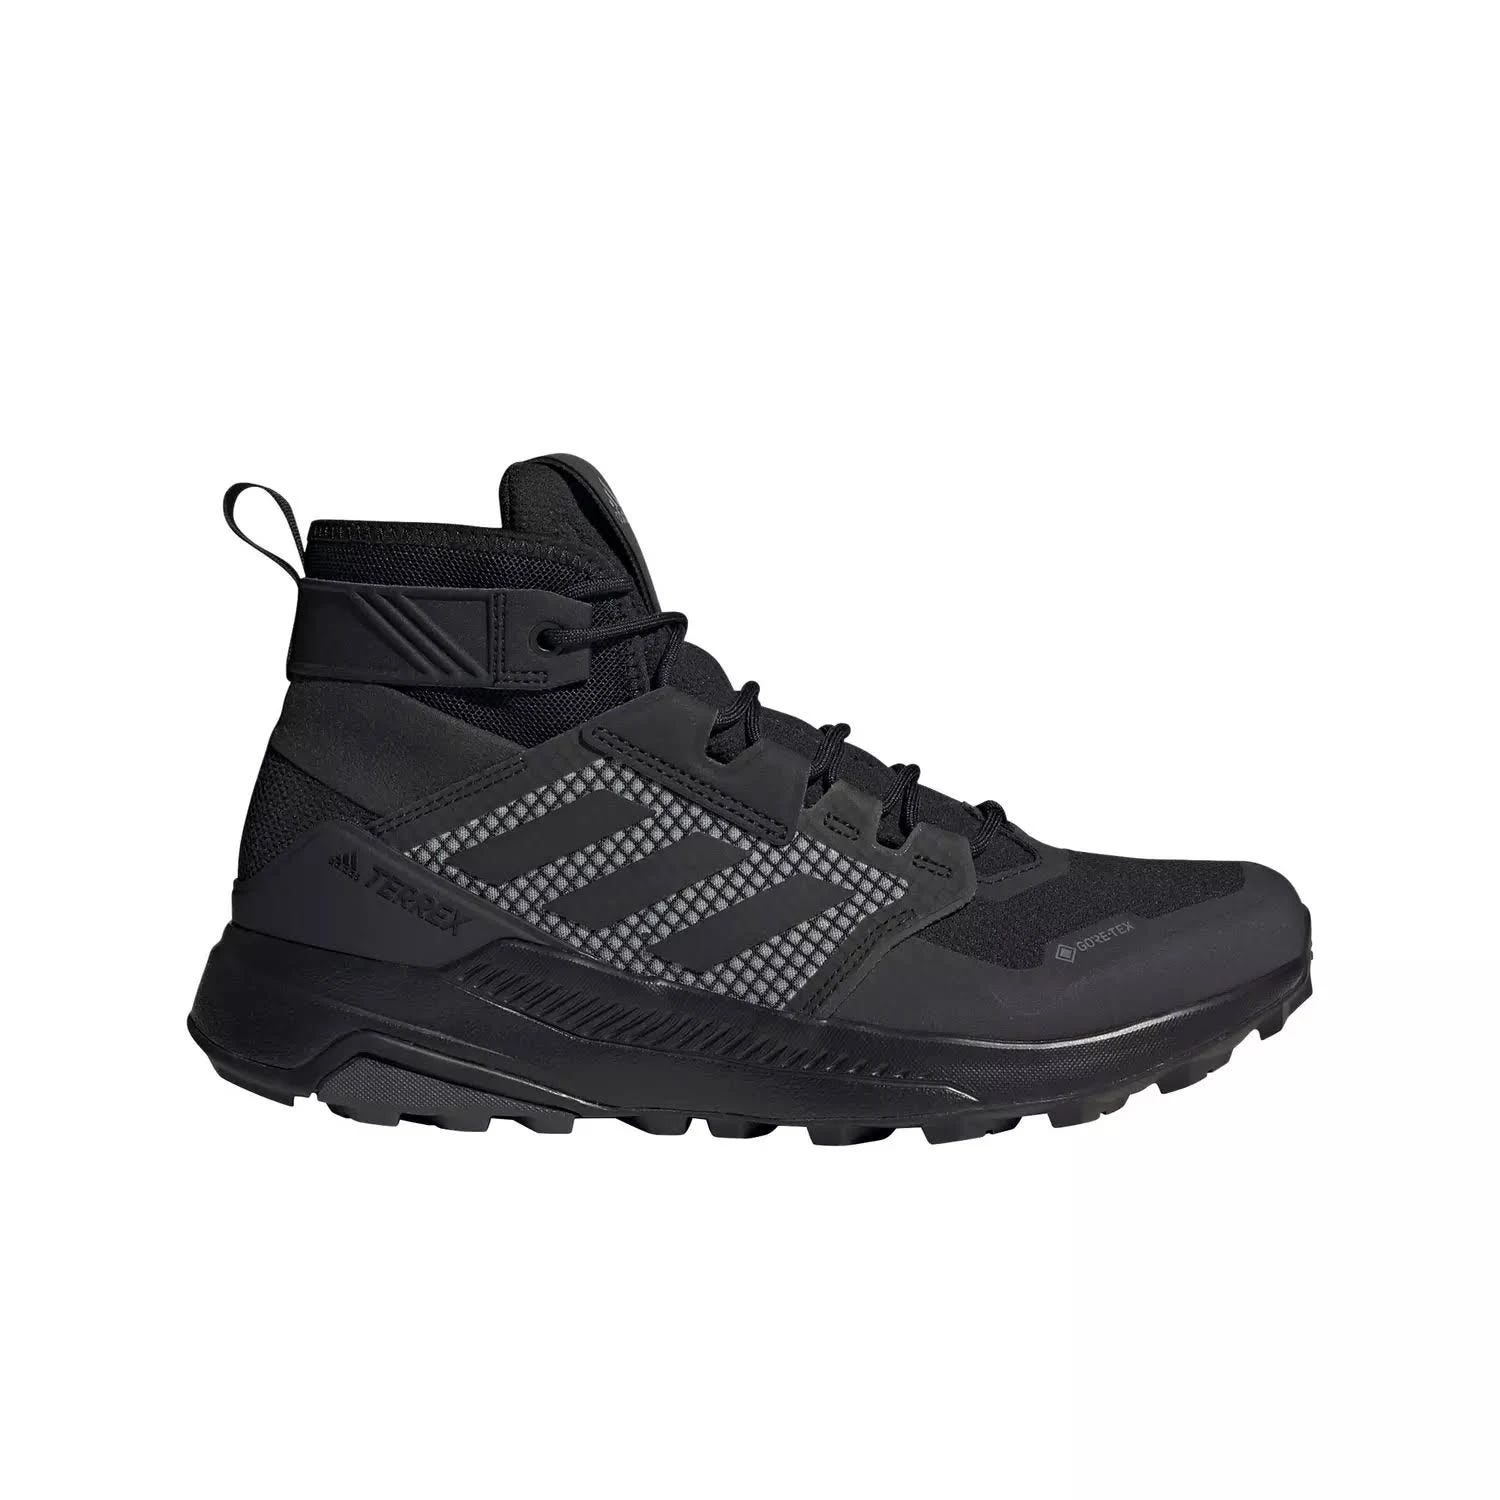 Adidas Trailmaker GORE-TEX Mid Hiking Shoes - Core Black/DGH Grey - Size 7 | Image